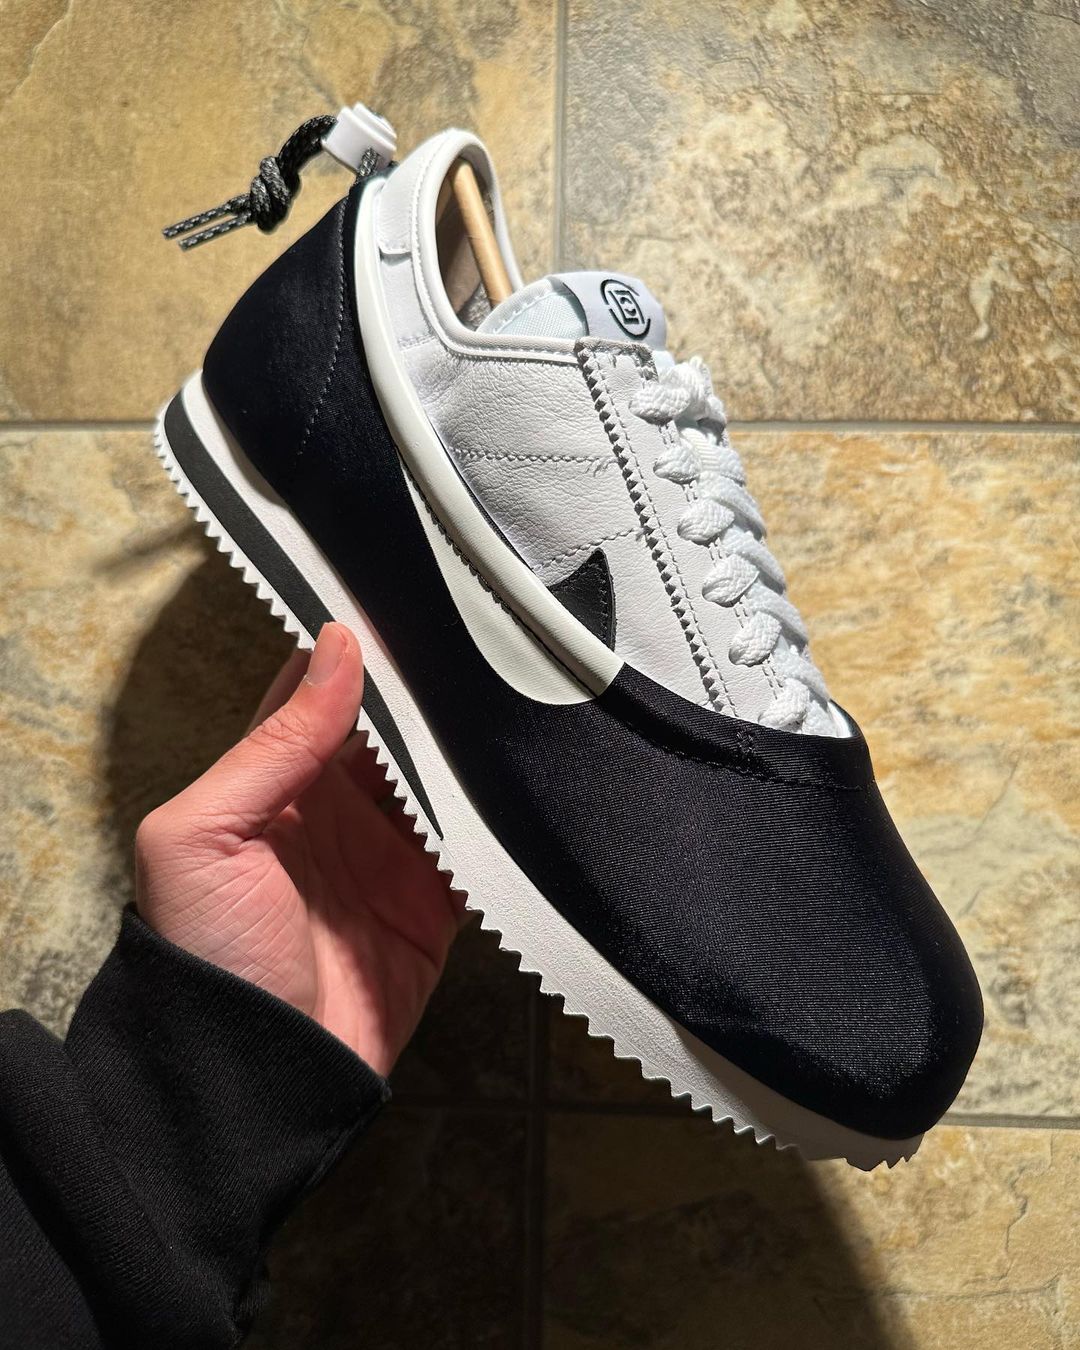 3 Nike Cortez Dupes That Are Just As Amazing As The Originals